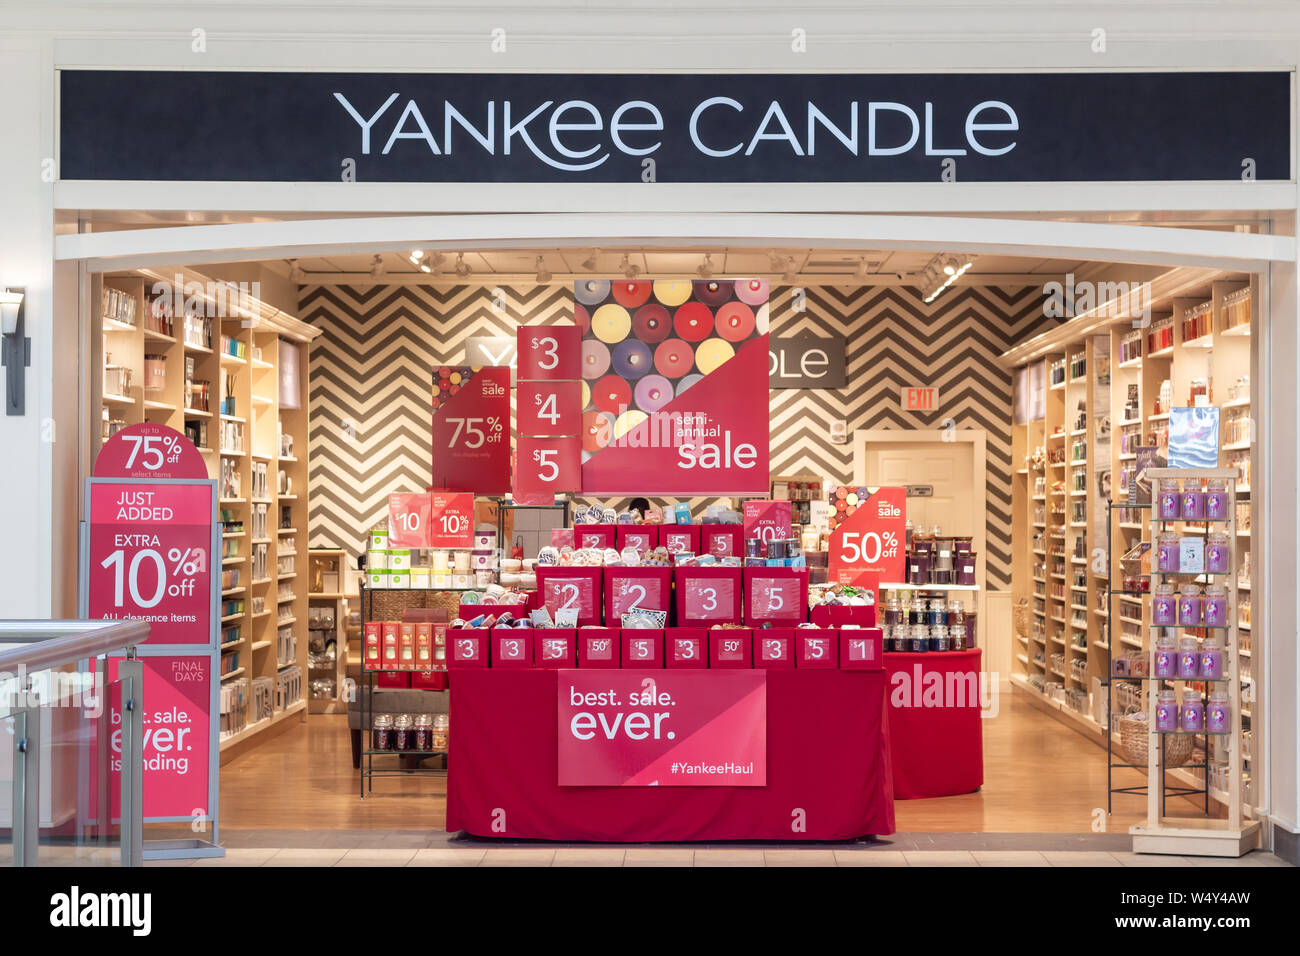 yankee candle jersey gardens mall